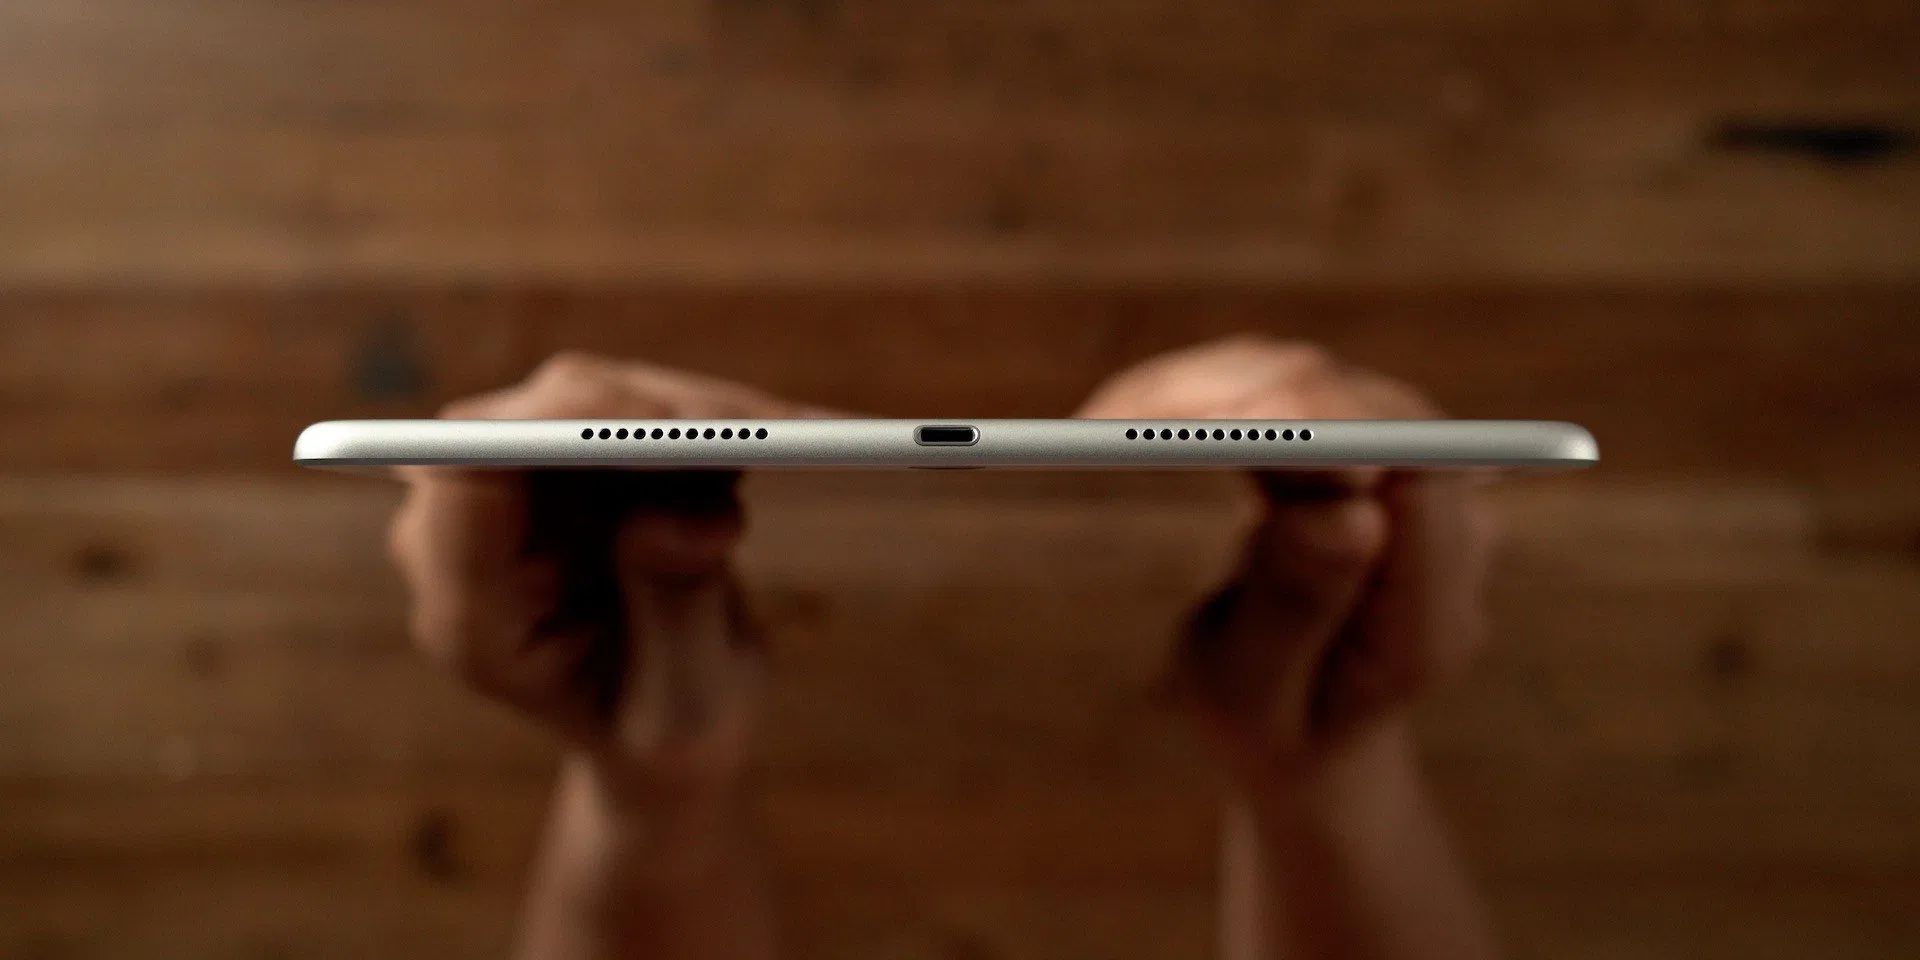 Report: Fourth-generation iPad Air to Switch to USB-C, iPad Mini Sticking With Lightning